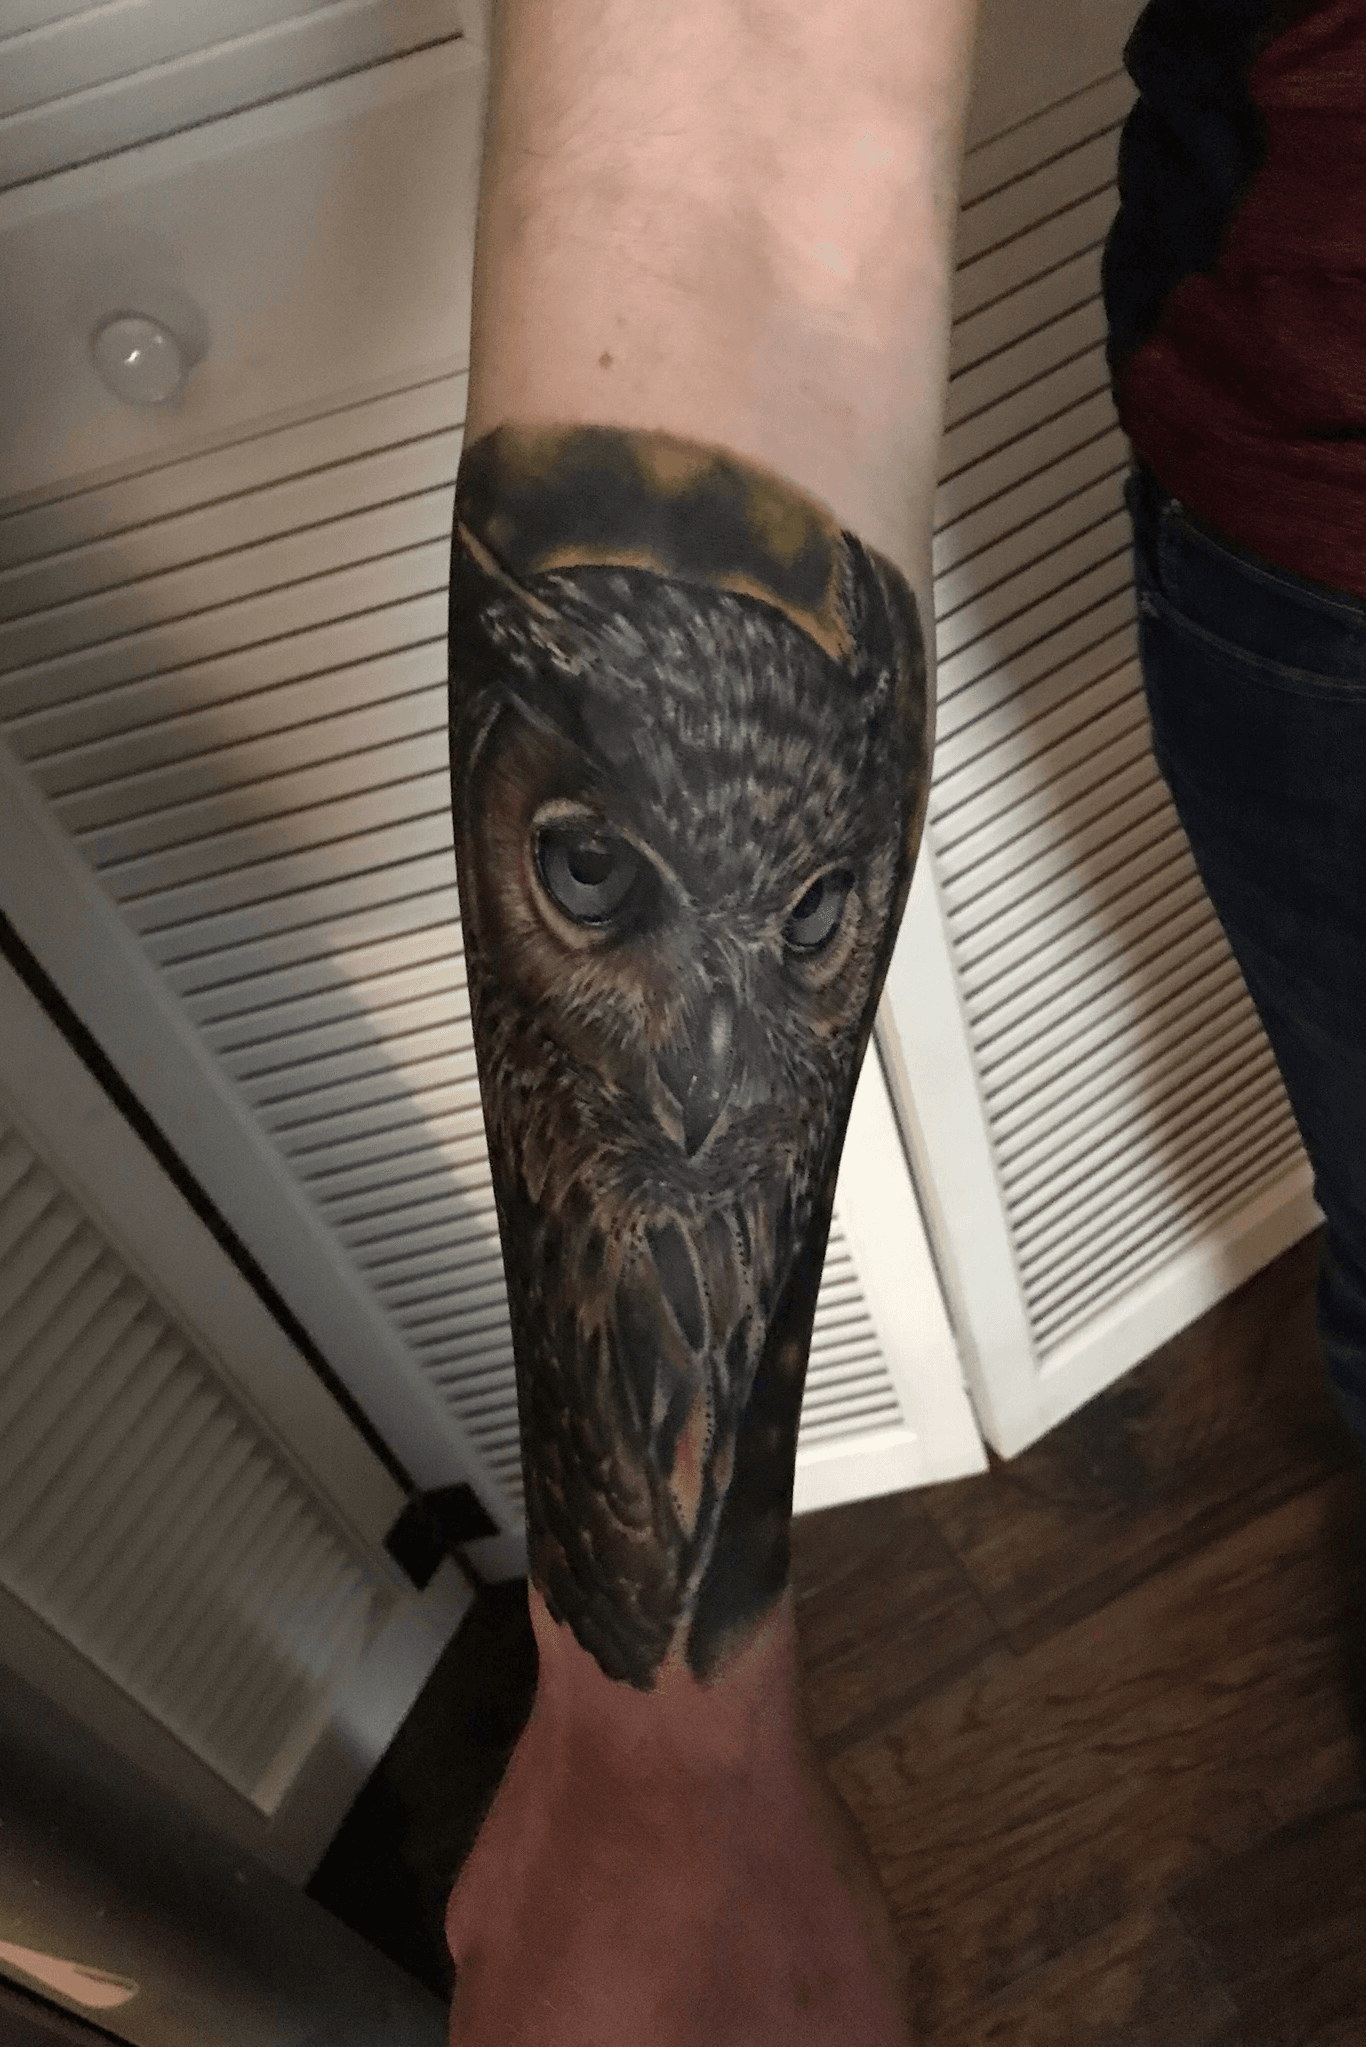 Tattoo uploaded by Joshua Nordstrom • An owl cover-up on the forearm. #owltattoo #forearmtattoos #coverup #colortattoos #realistic #animal #bird • Tattoodo